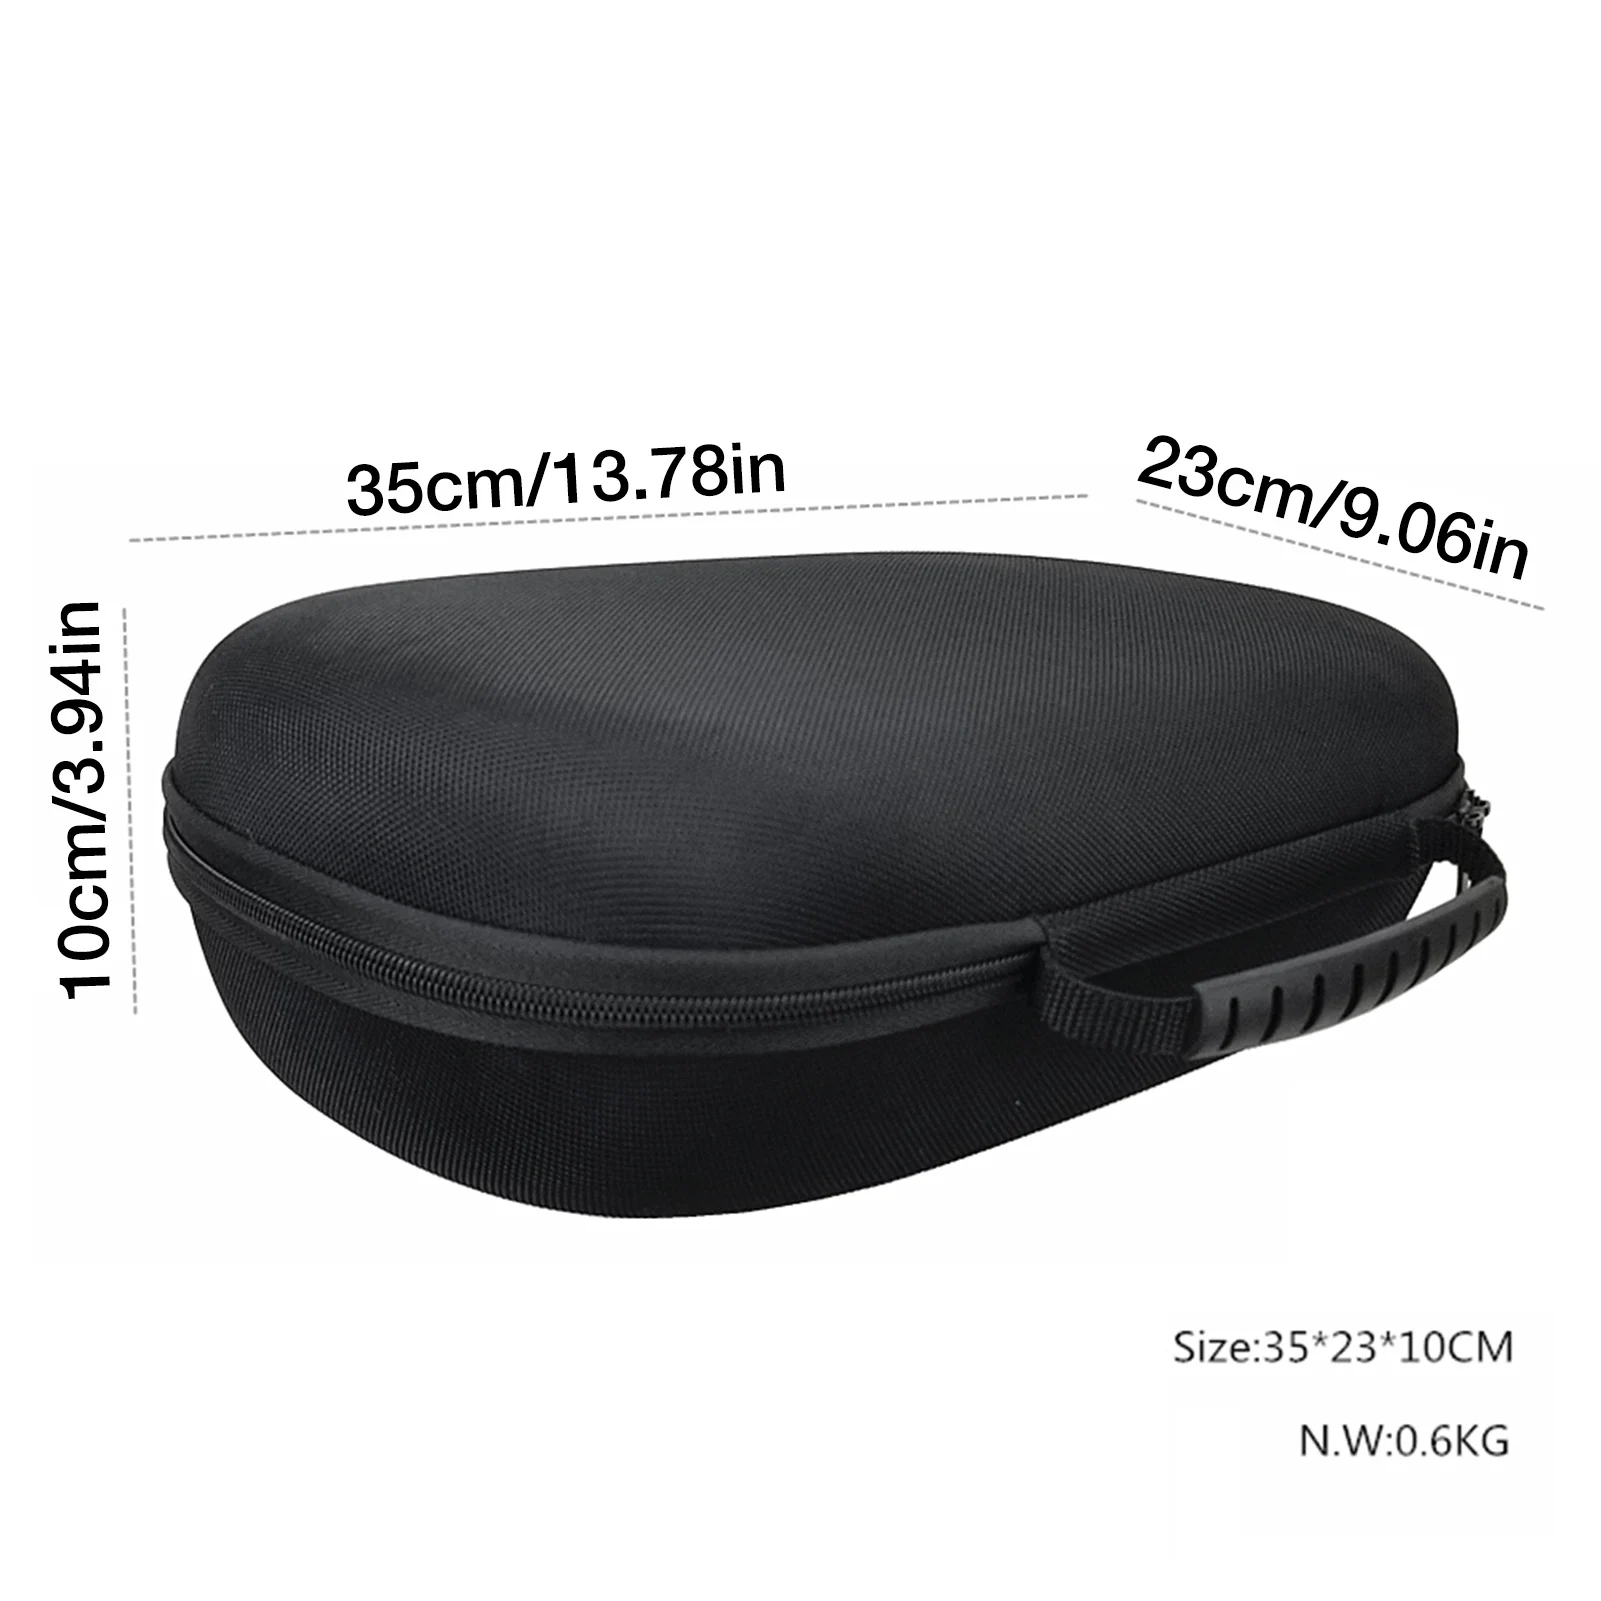 Protable VR Accessories For Oculus Quest 2 VR Headset Travel Carrying Case Oxford Cloth Storage Box Accessories 2021 images - 6